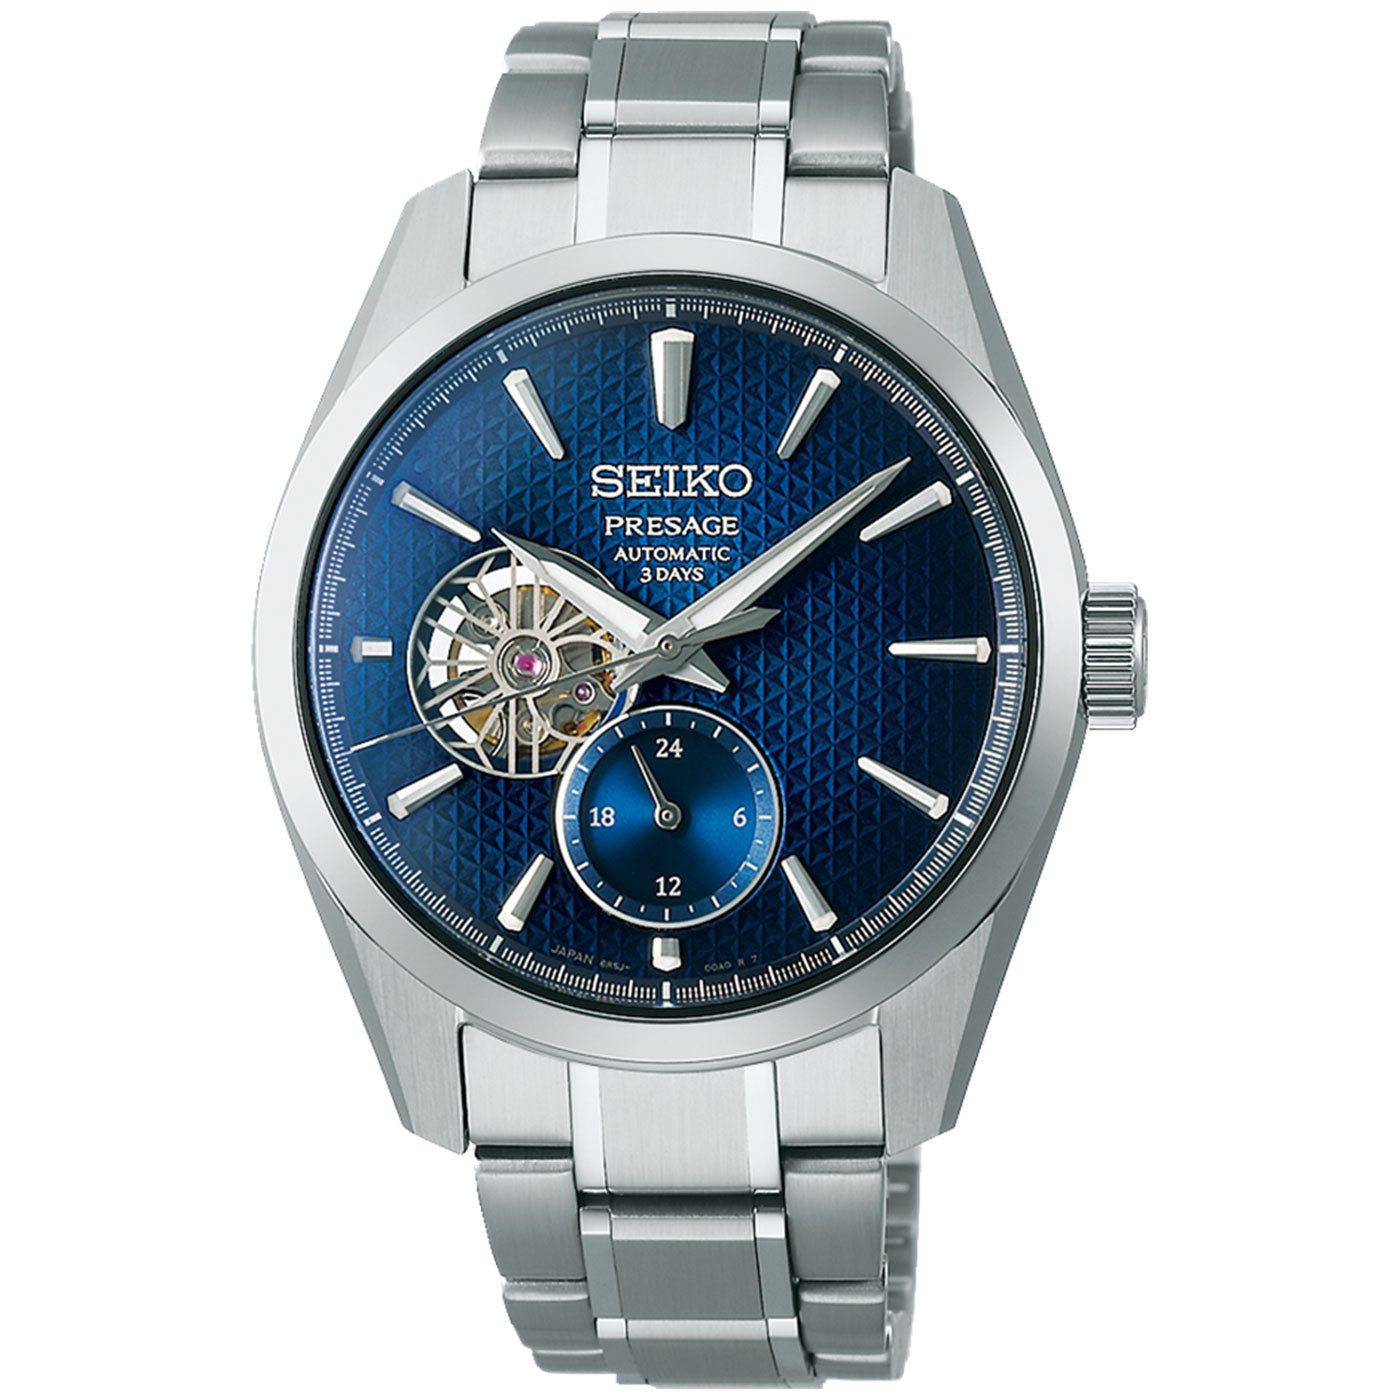 Seiko Presage Sharp Edge Series Automatic with Manual Winding 40.2mm Watch